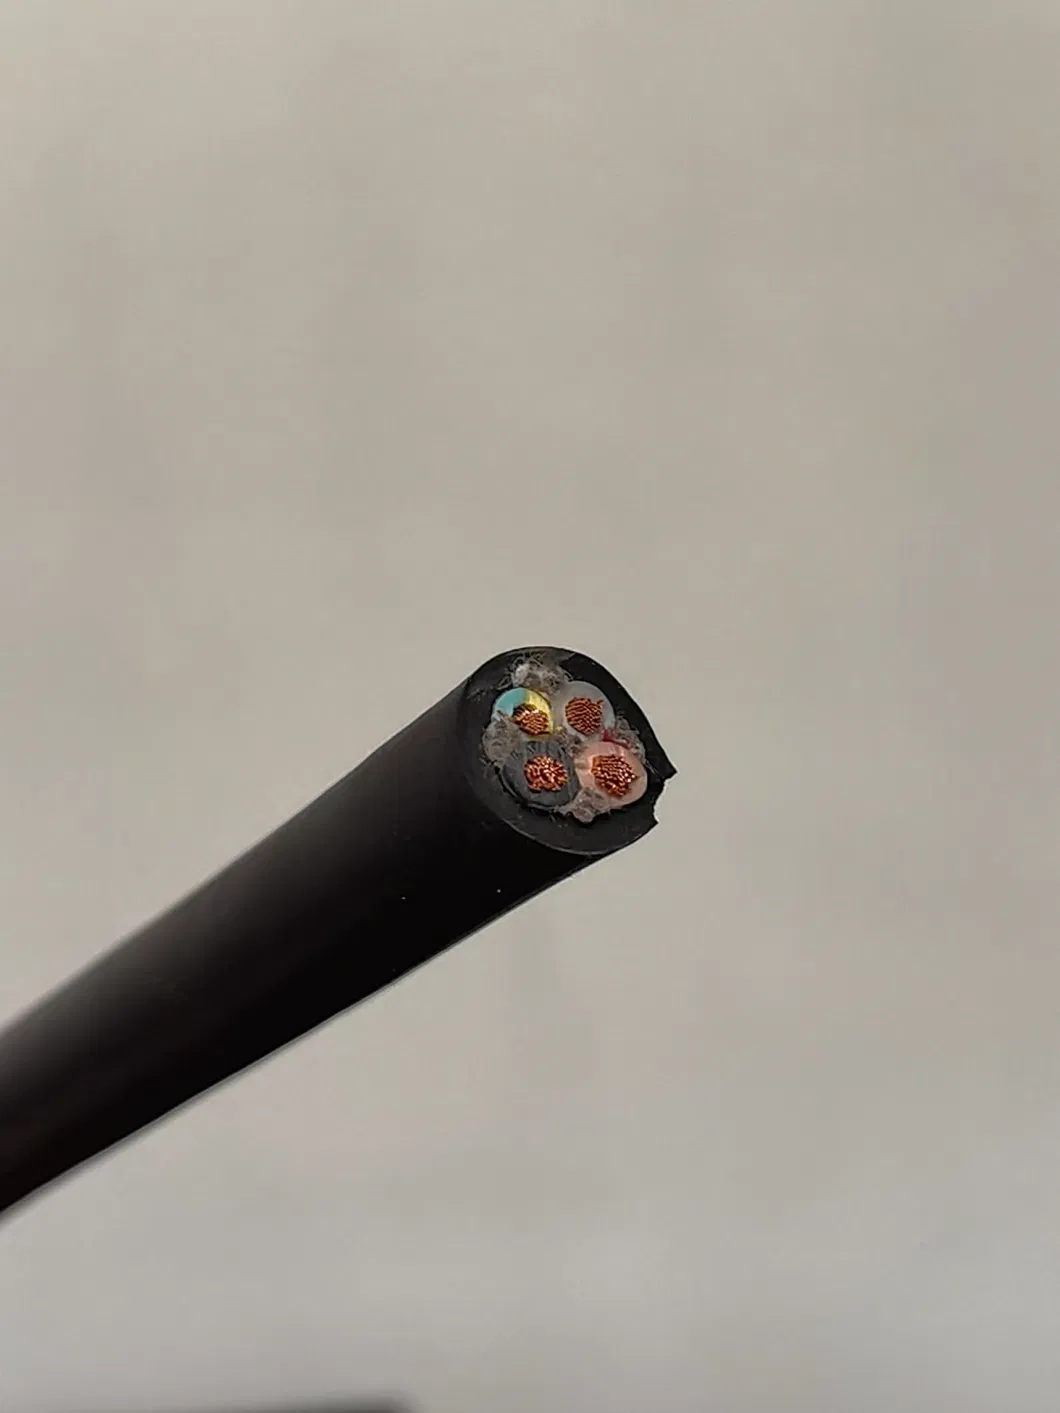 Rated Voltage 300/500V Copper Conductor Superflex Medium-Duty Rubber Sheathed Flexible Cable